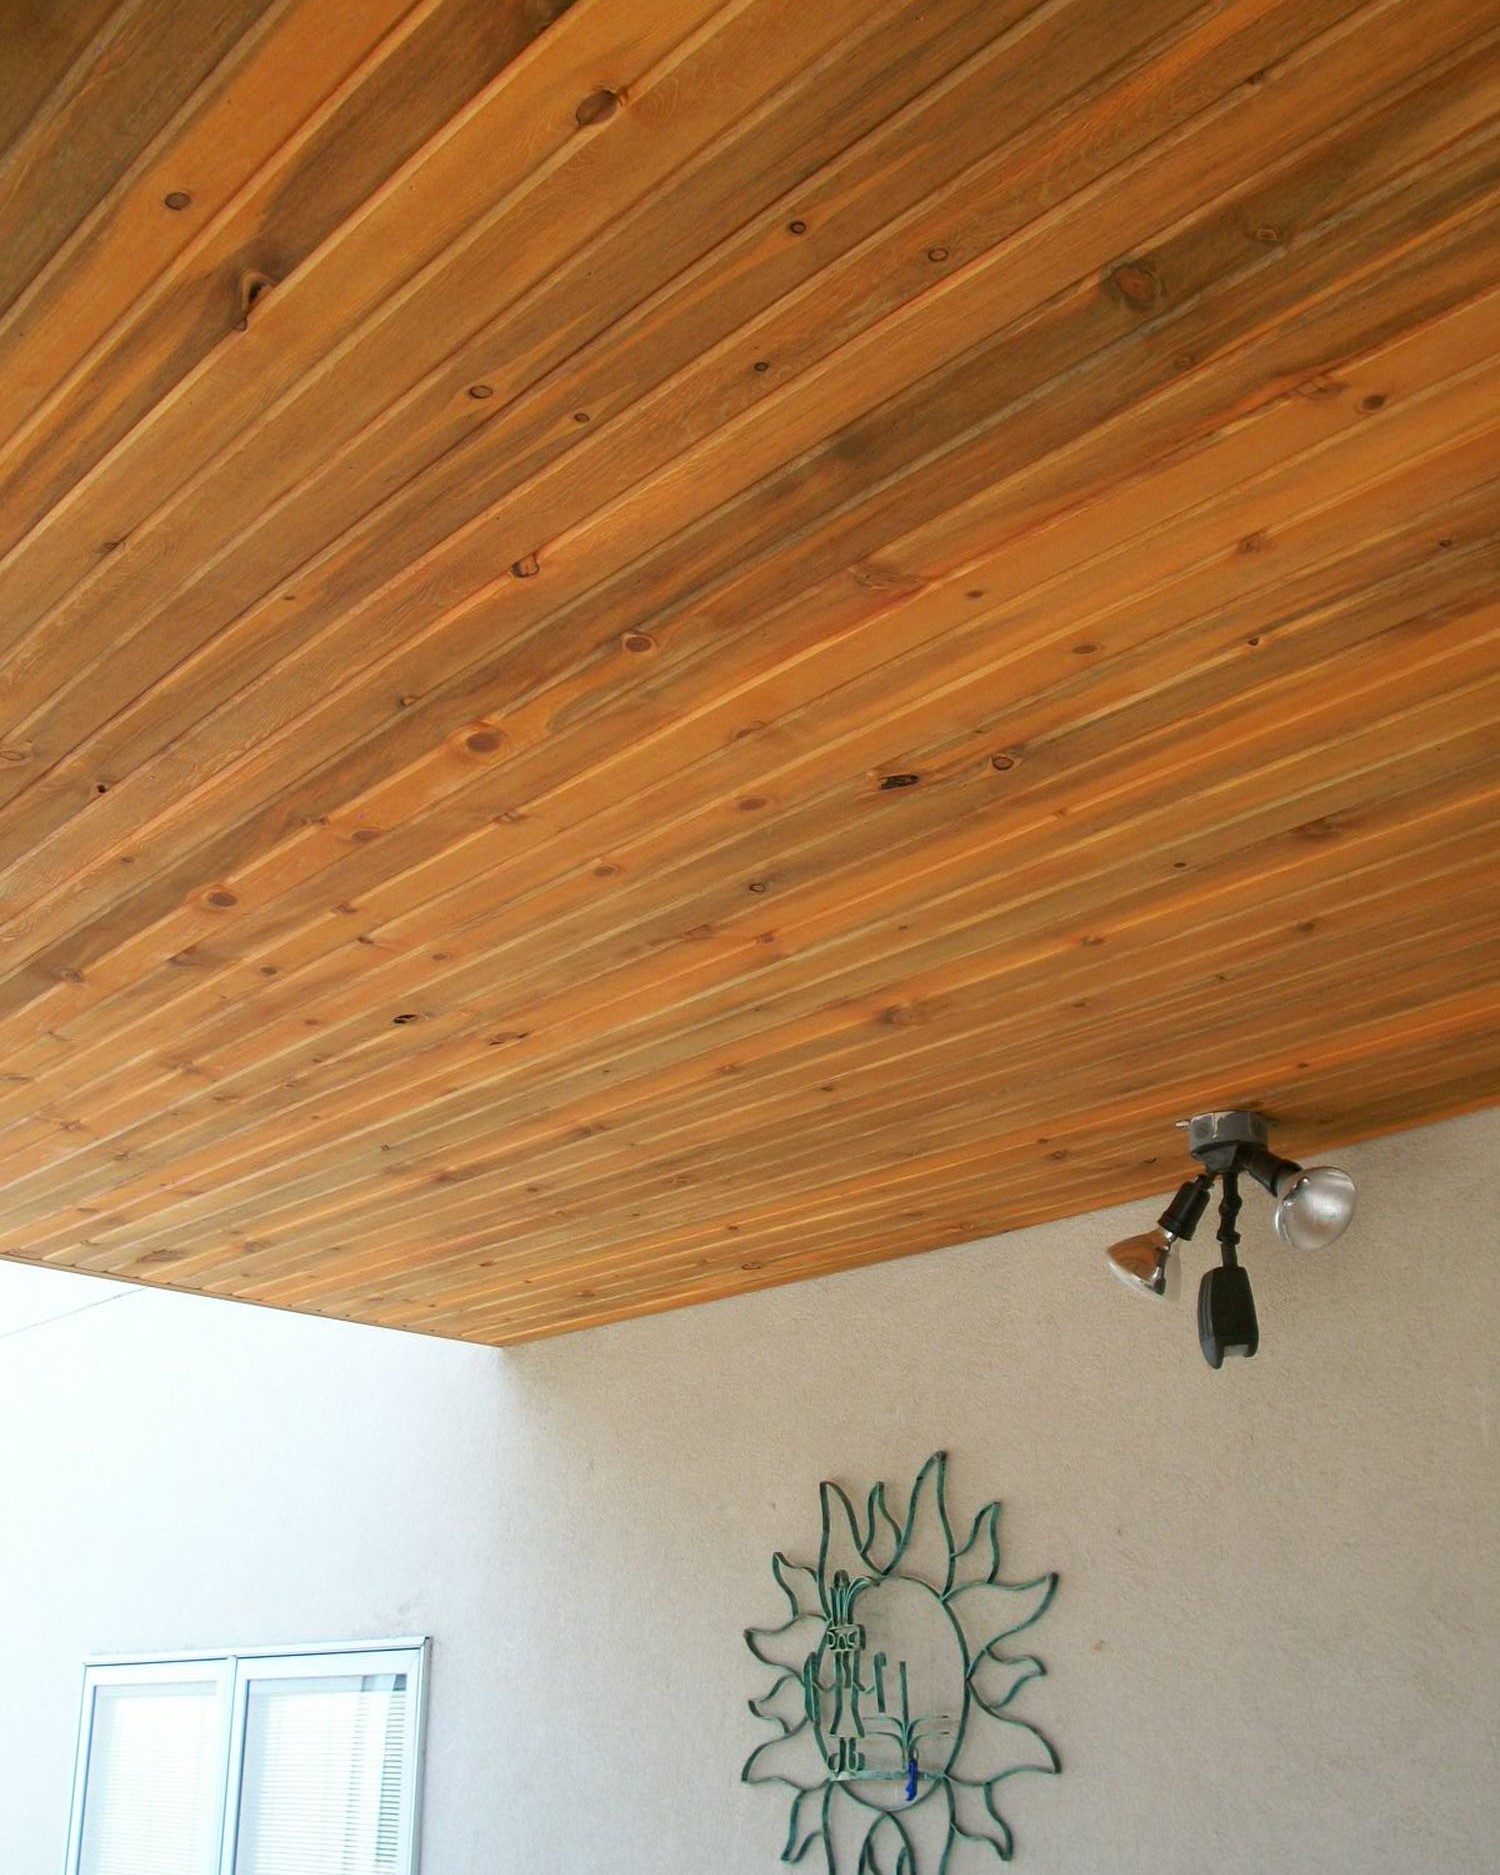 An under-deck drainage system that features a Beetle Kill Pine tongue and groove ceiling with outdoor lighting installed.